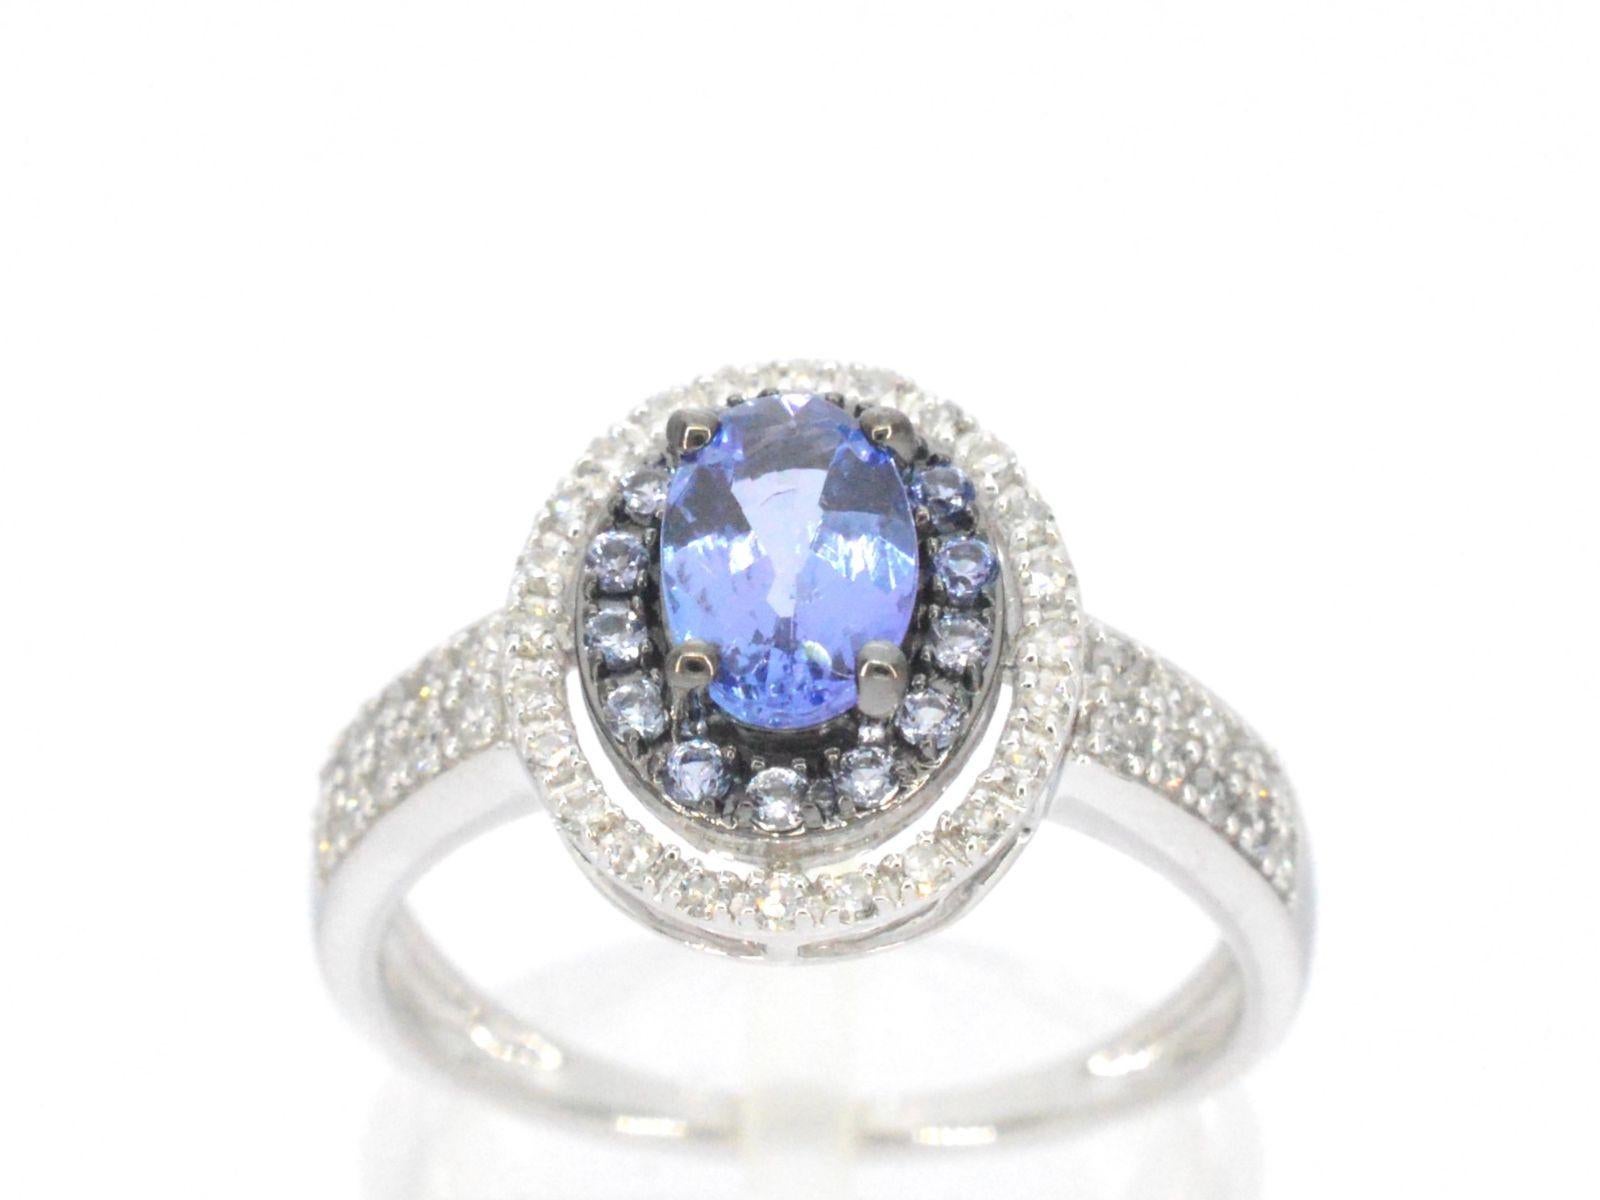 This elegant white gold ring features a stunning combination of diamonds and tanzanite gemstones. The diamonds are expertly set in a beautifully crafted white gold band, while the deep blue tanzanite gemstones add a pop of color and depth to the